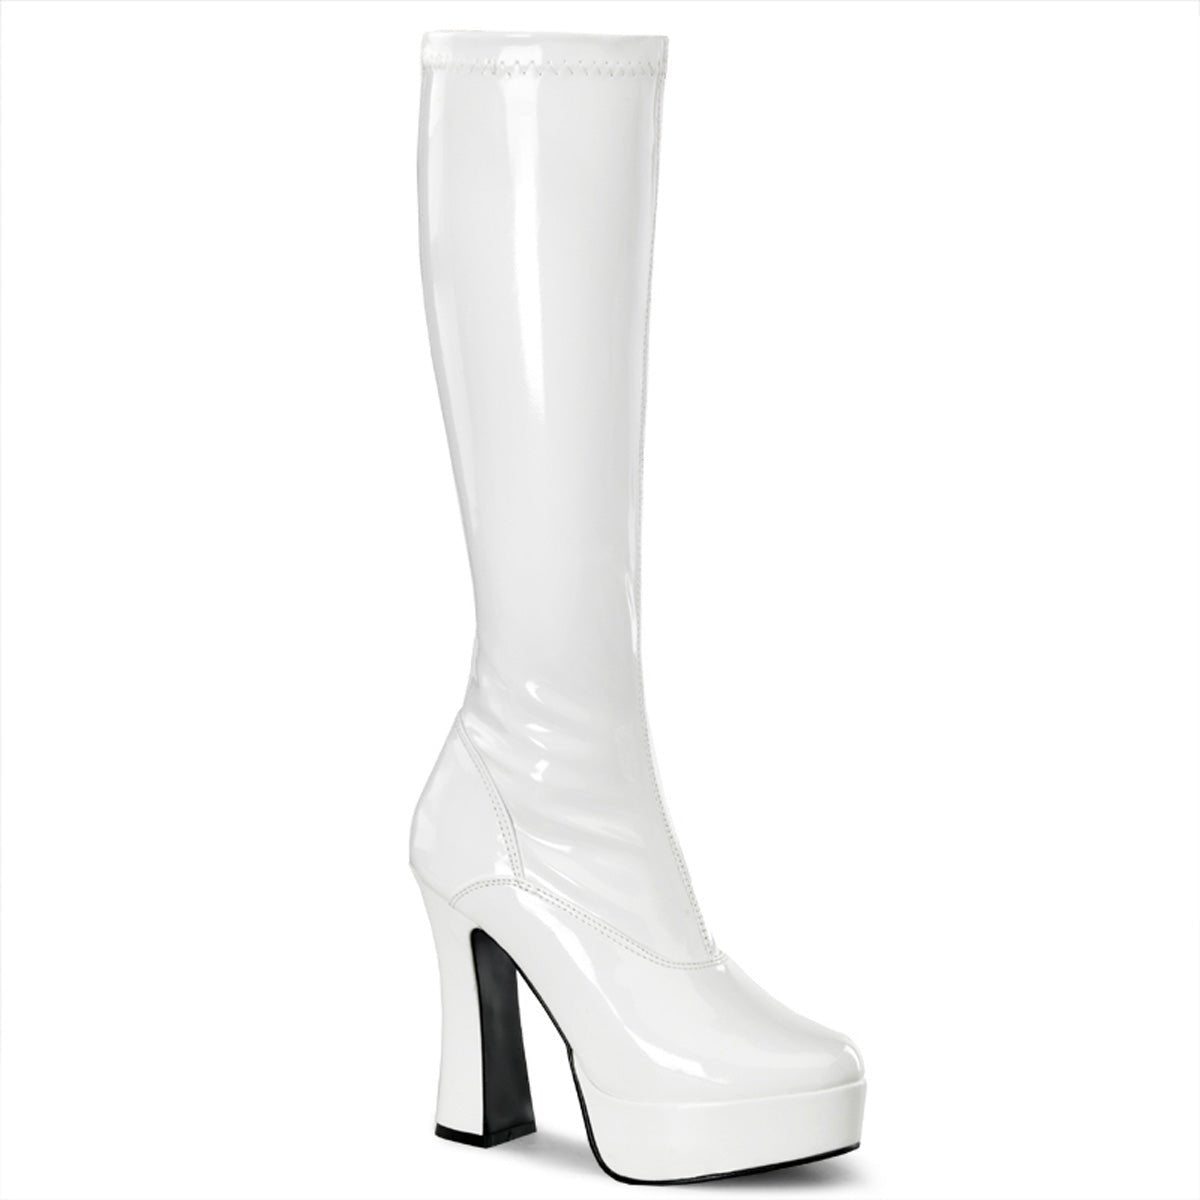 Clearance Pleaser Electra 2000 White Patent Size 11UK/14USA